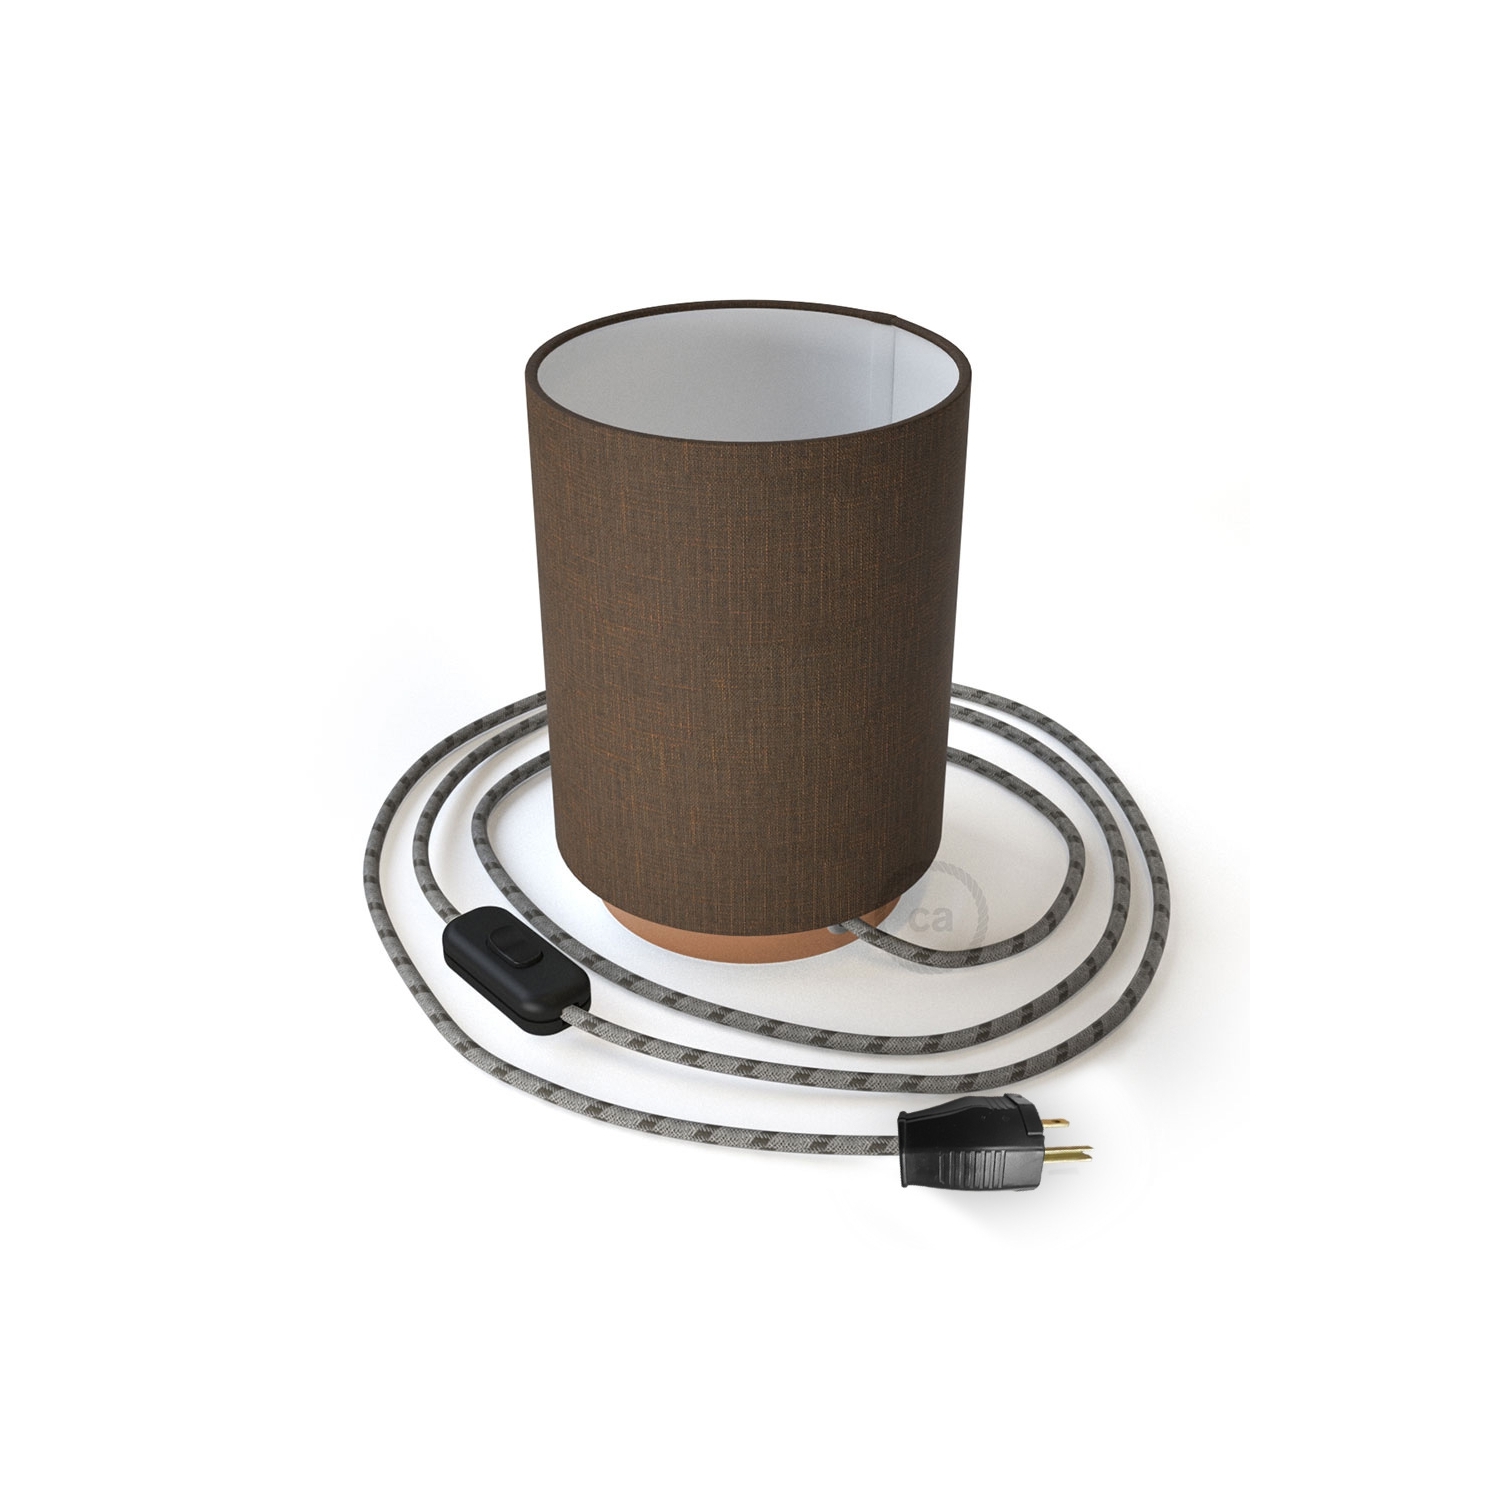 Posaluce with Brown Camelot Cylinder lampshade, coppered metal, with textile cable, switch and plug